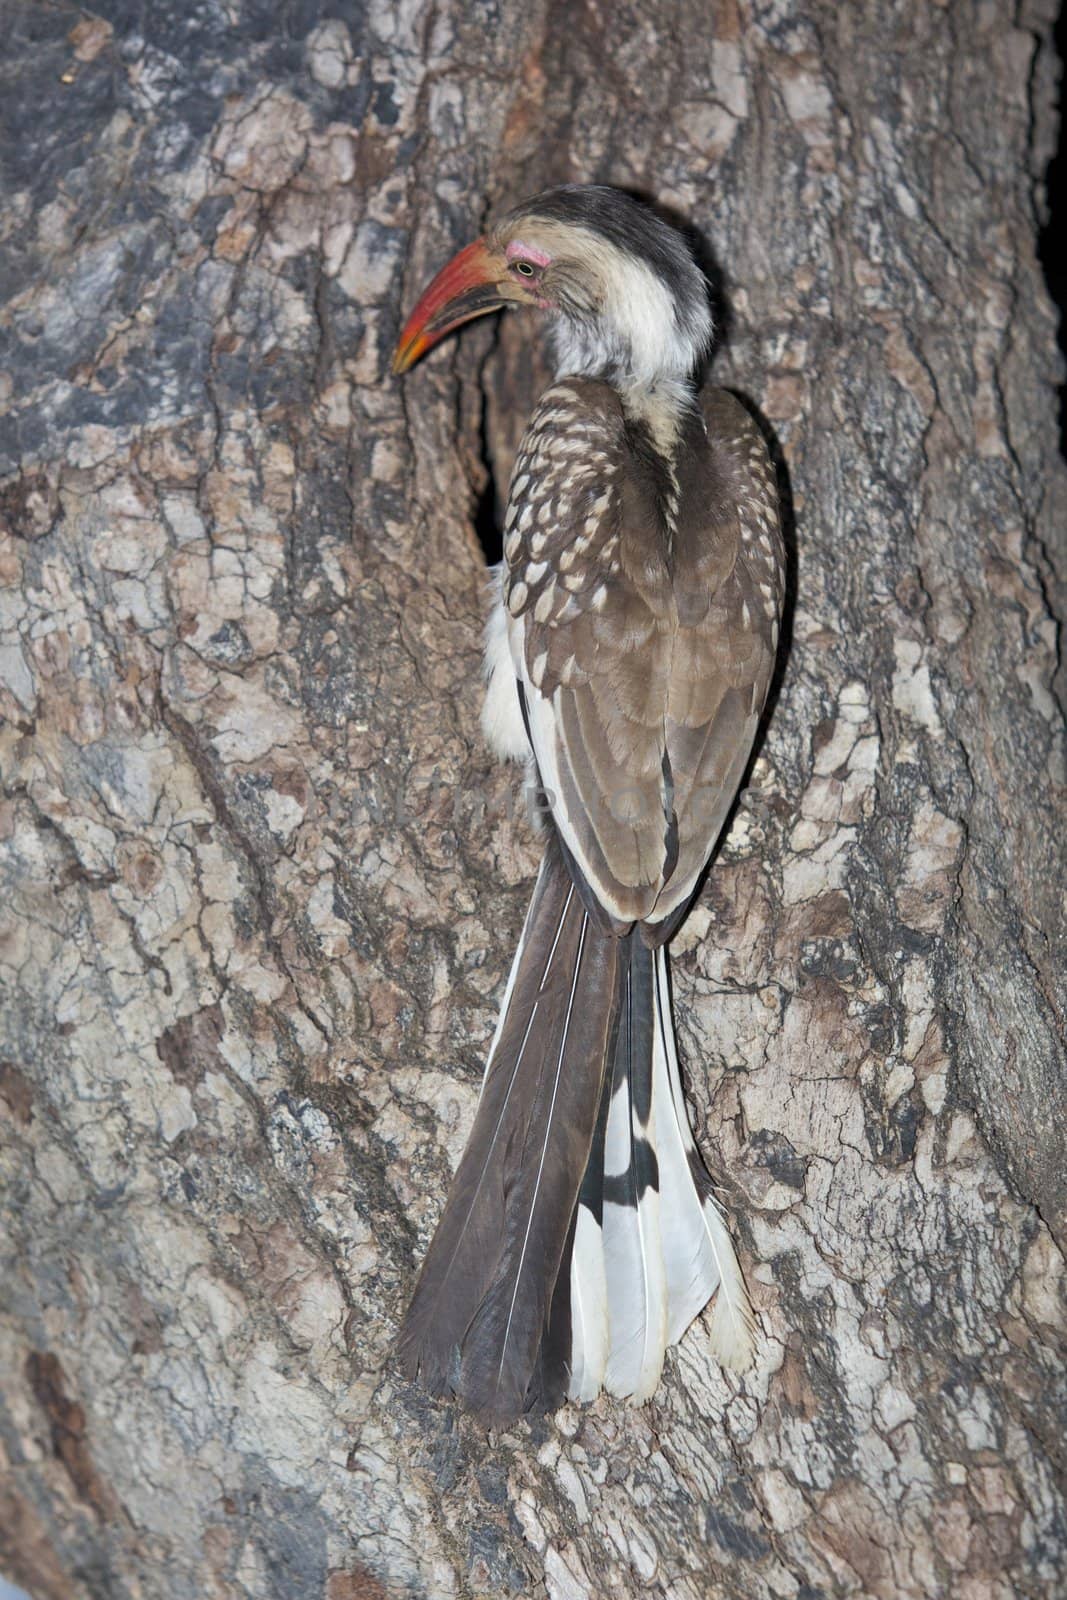 A Red-Billed Hornbill feeding chicks at its nest in the Kruger National Park, South Africa.